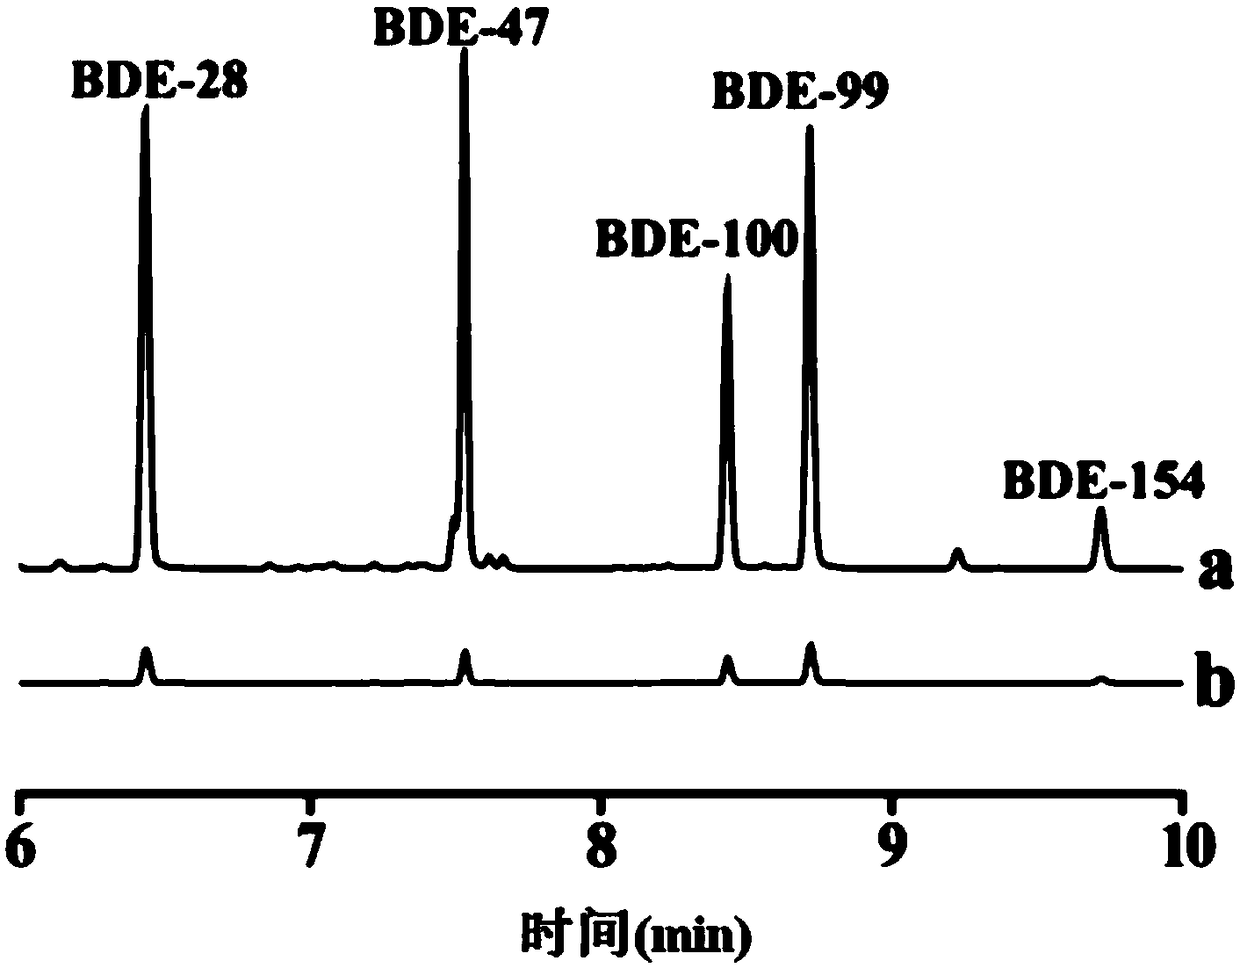 Ultrasensitive method for analyzing trace polybrominated diphenyl ethers in water